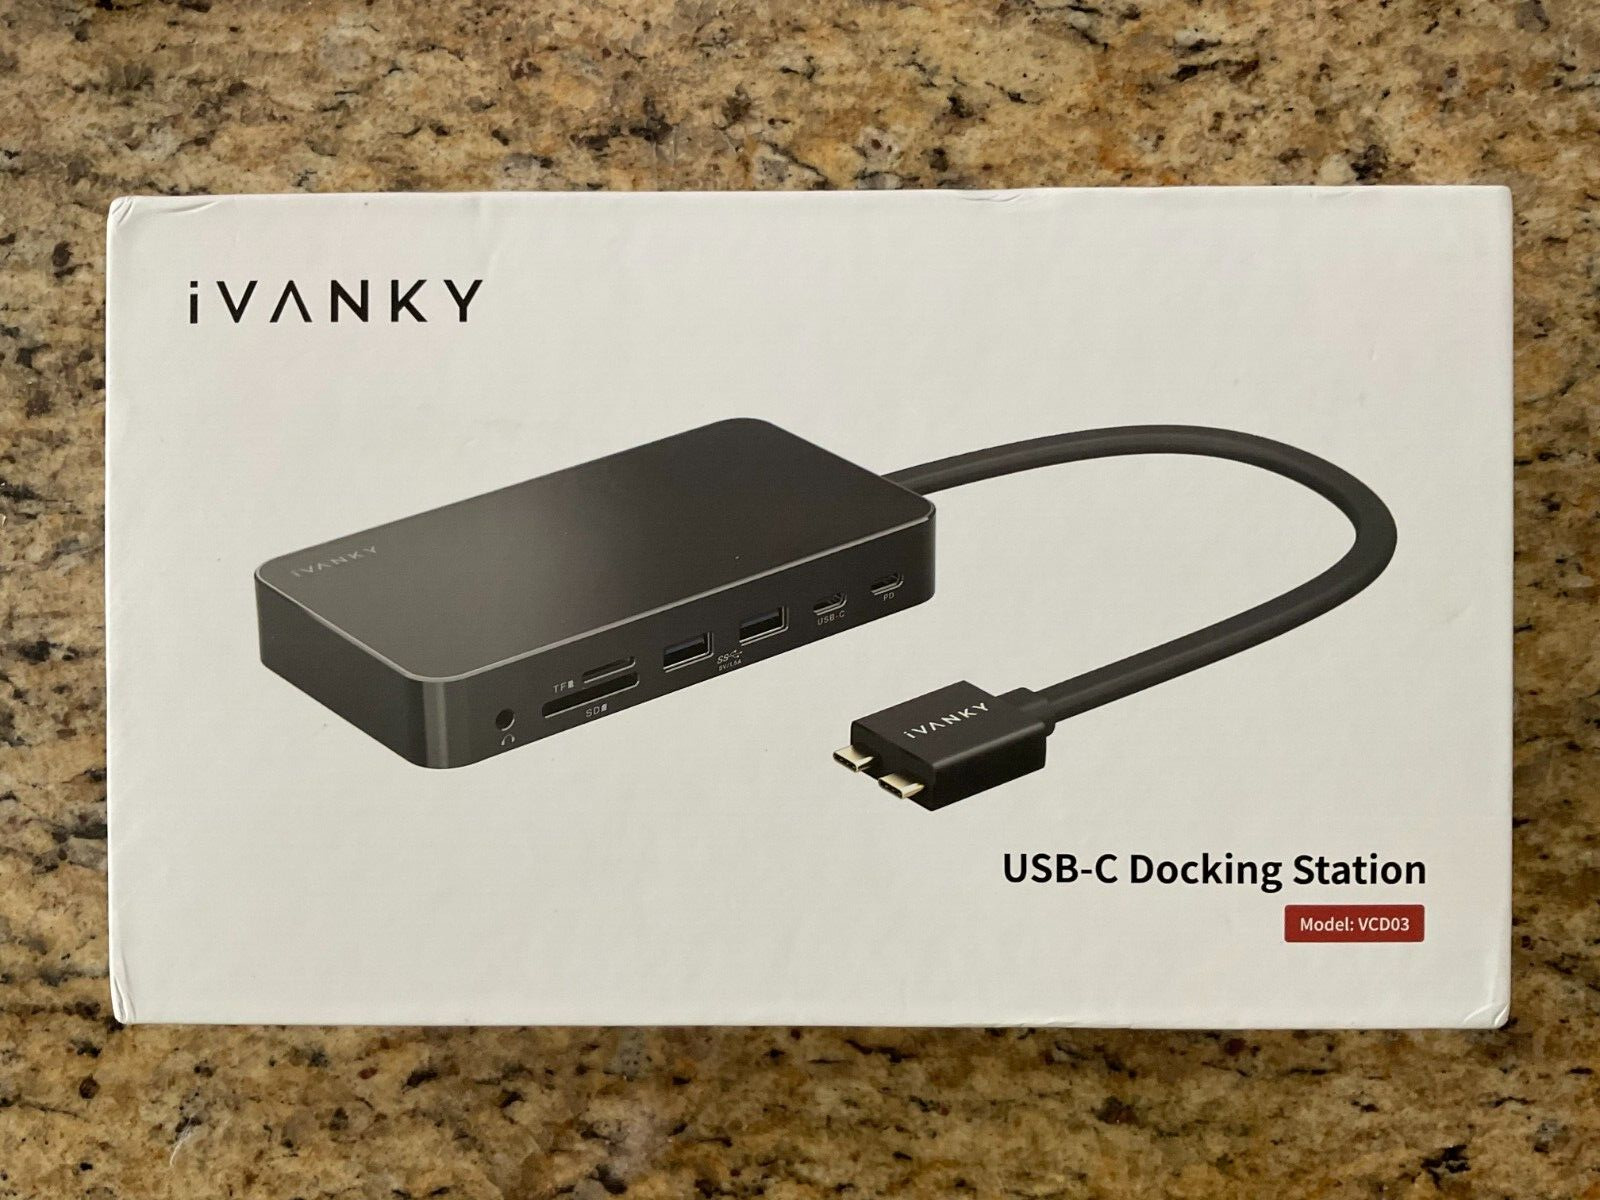 iVANKY FusionDock 1 MacBook Pro Docking Station with 150W Power Adapter, 12-in-2